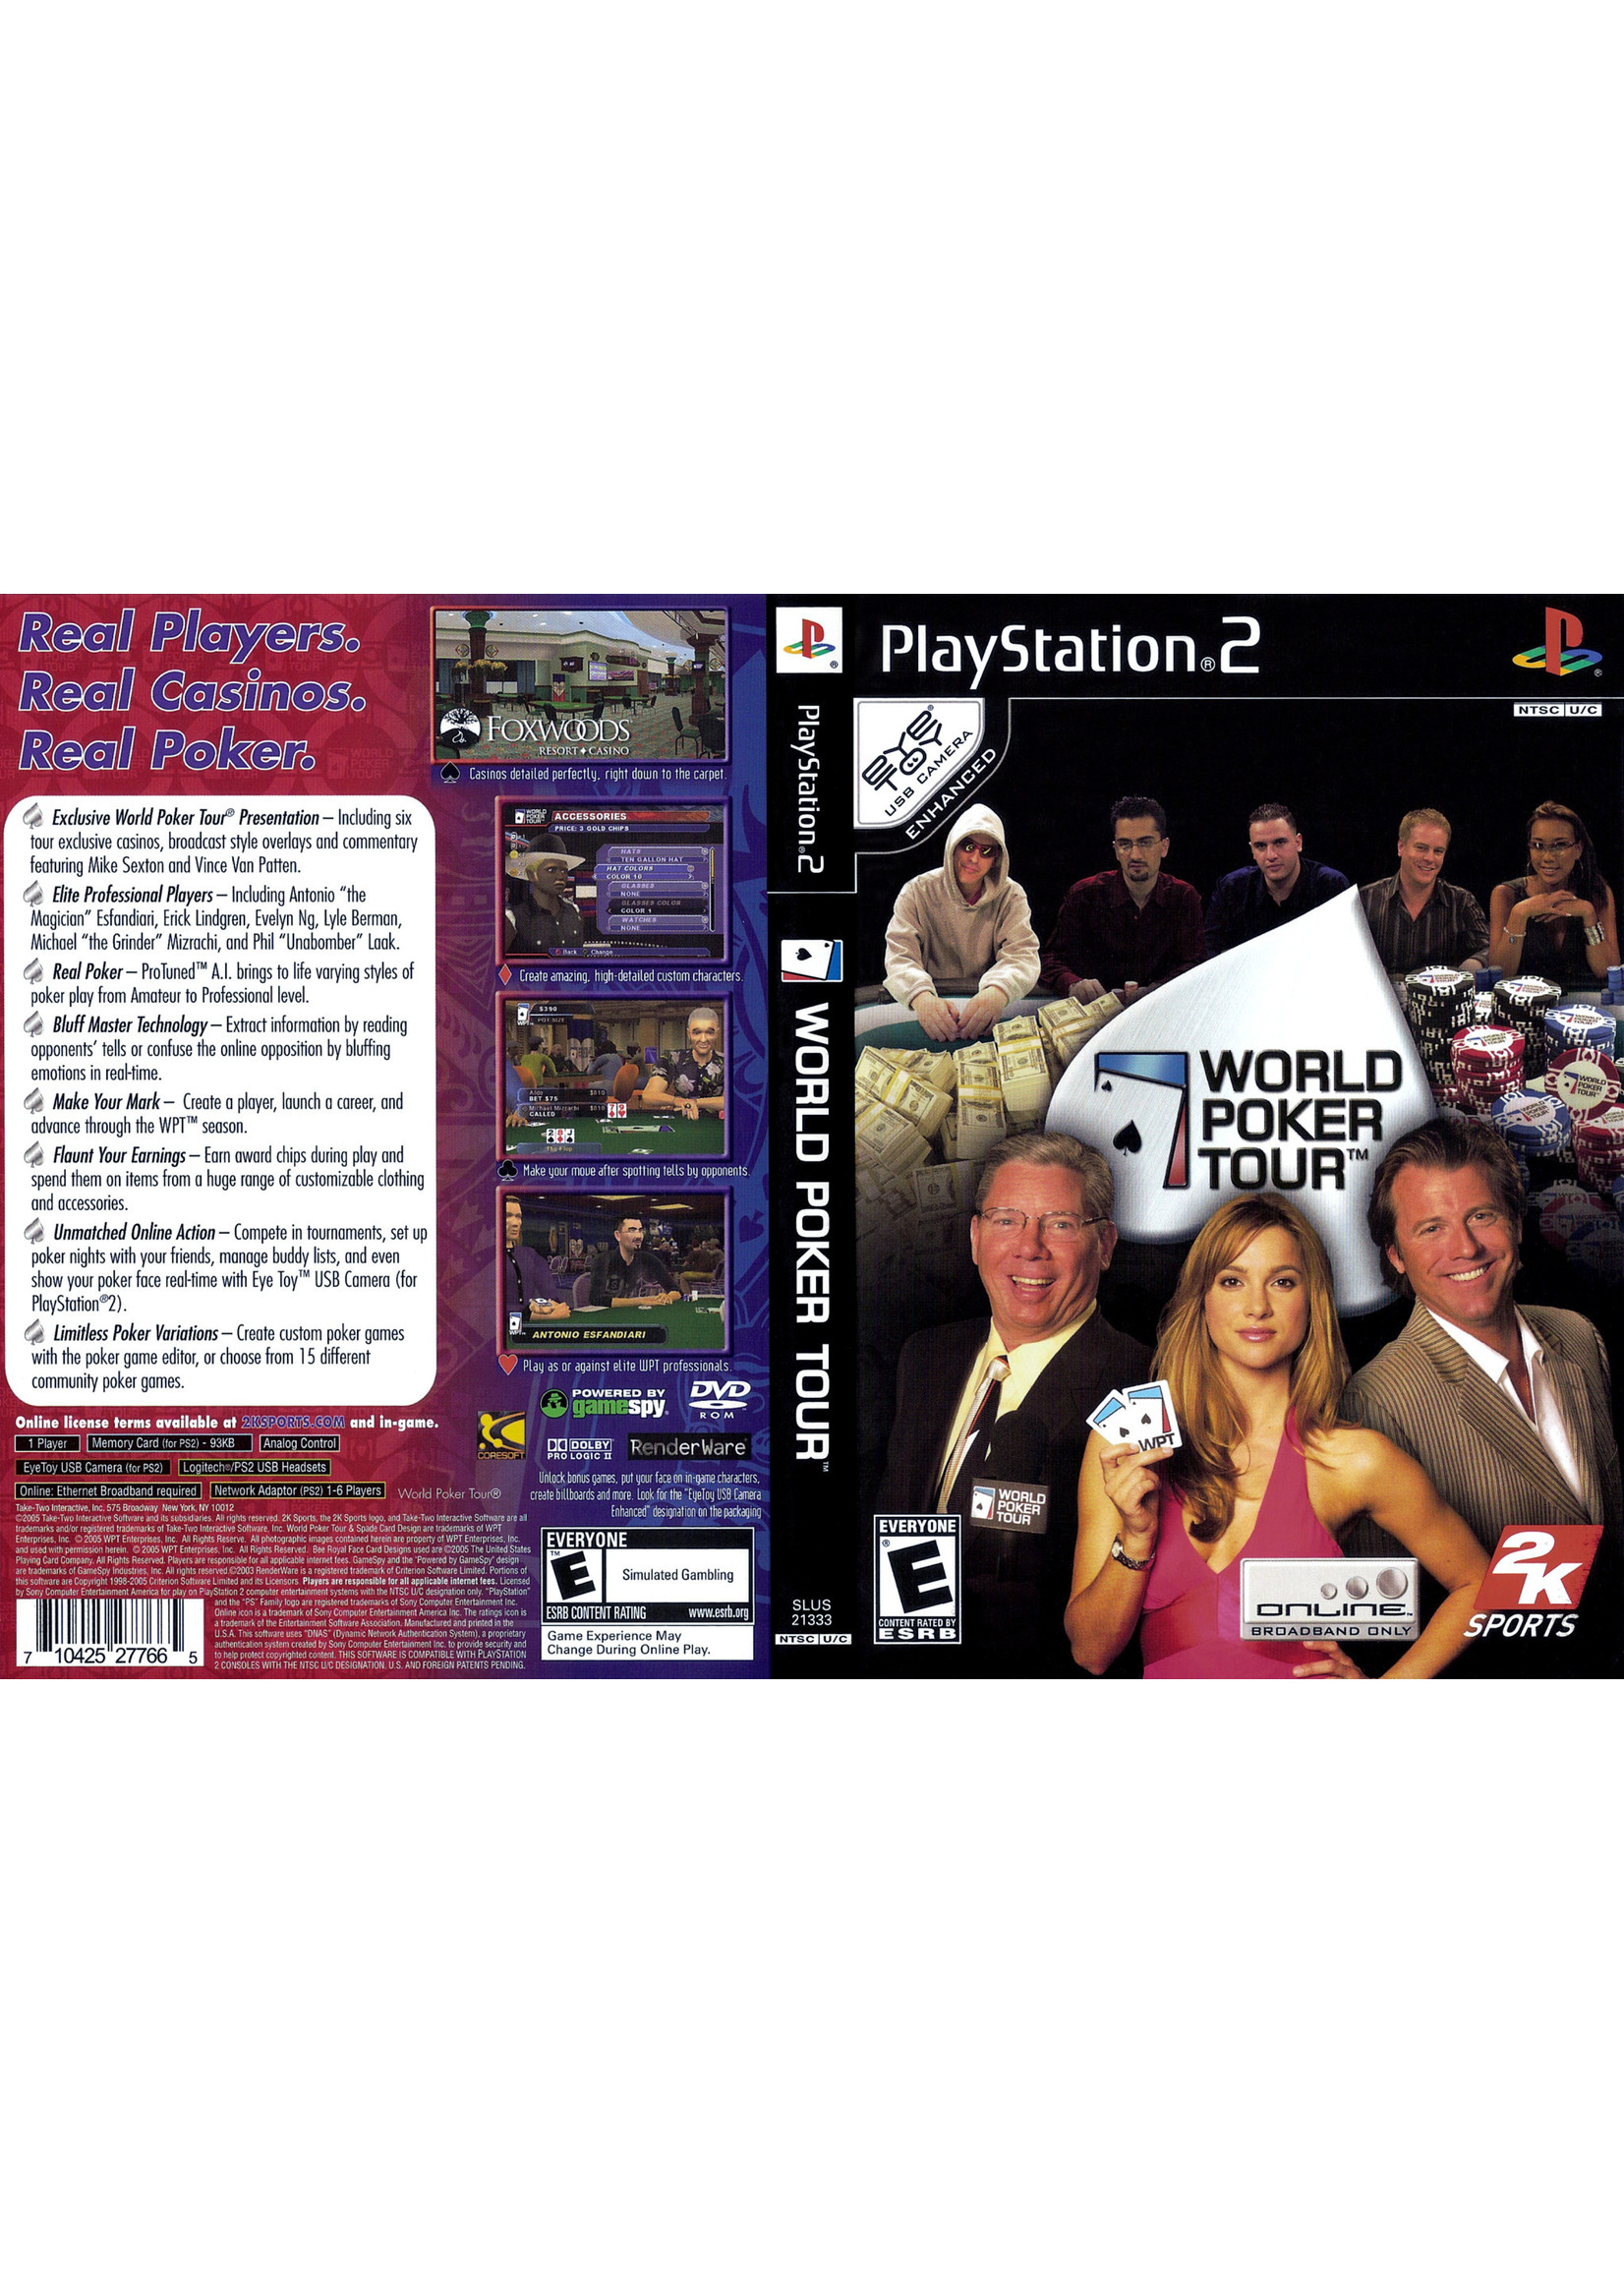 Sony Playstation 2 (PS2) World Poker Tour